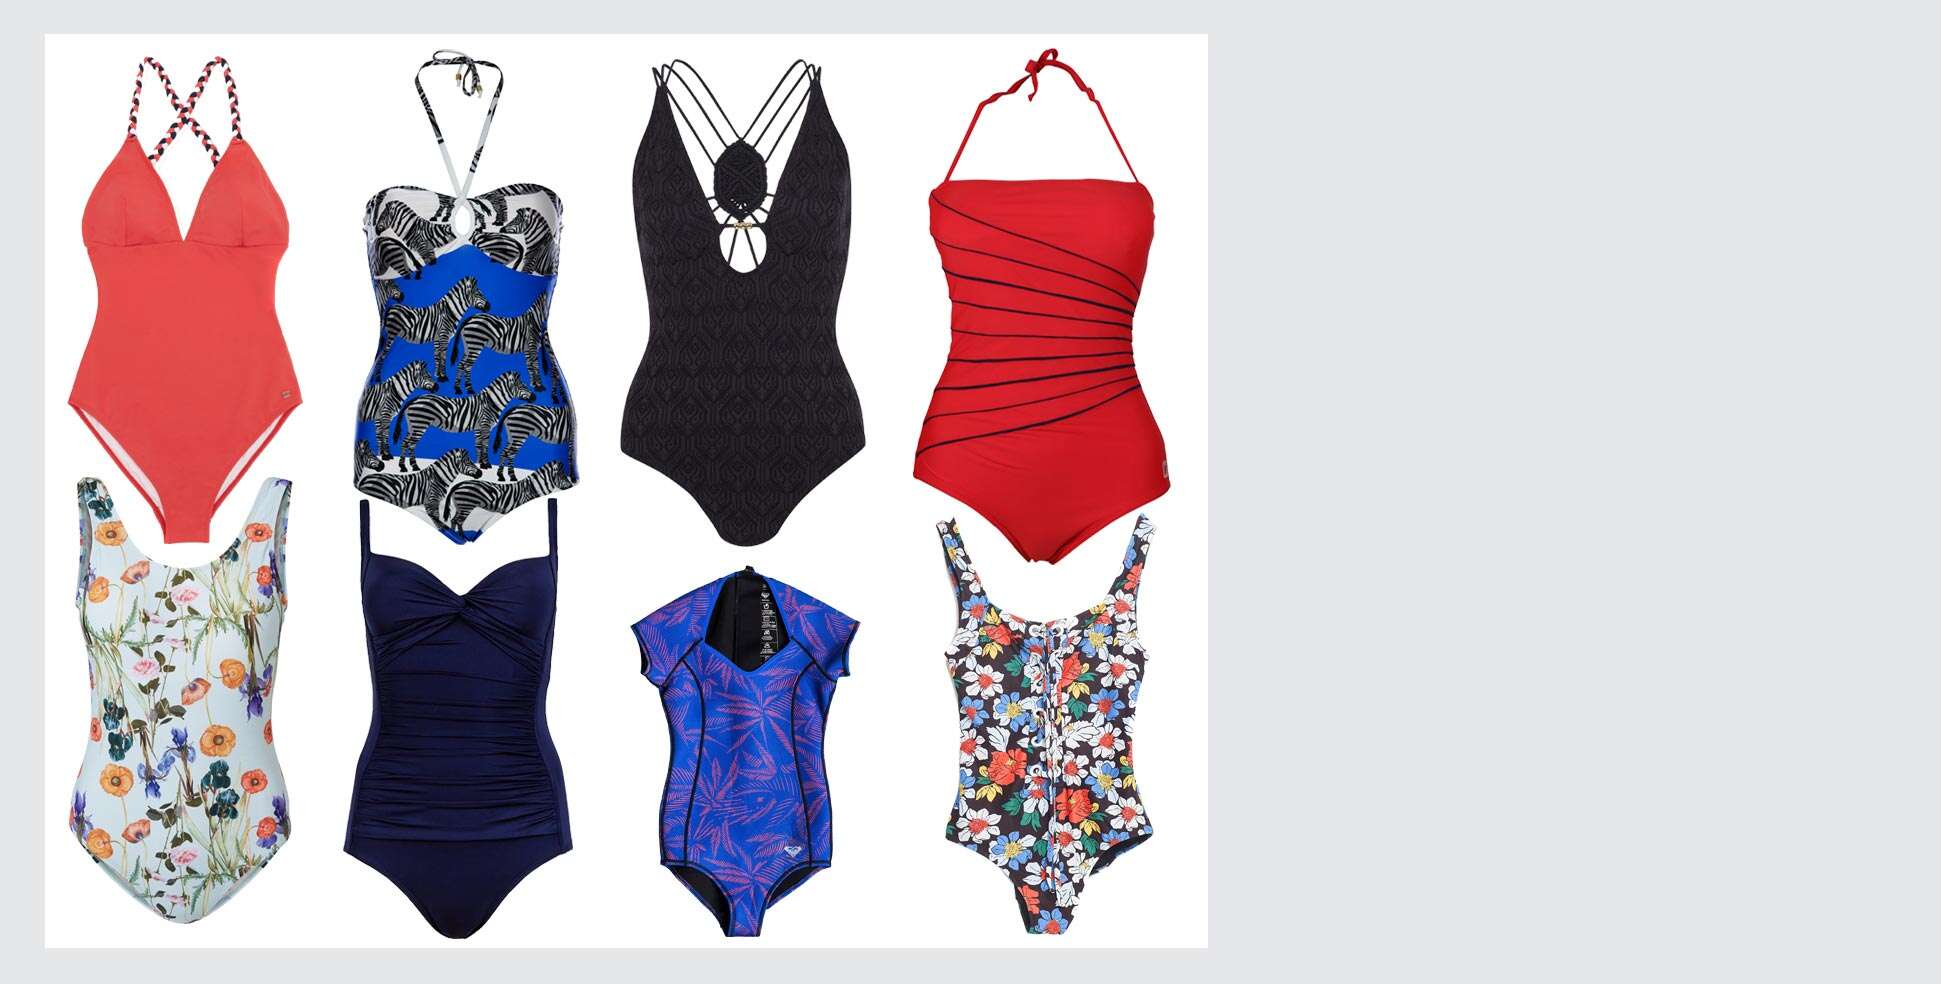 Swimsuit options to try now | Femina.in